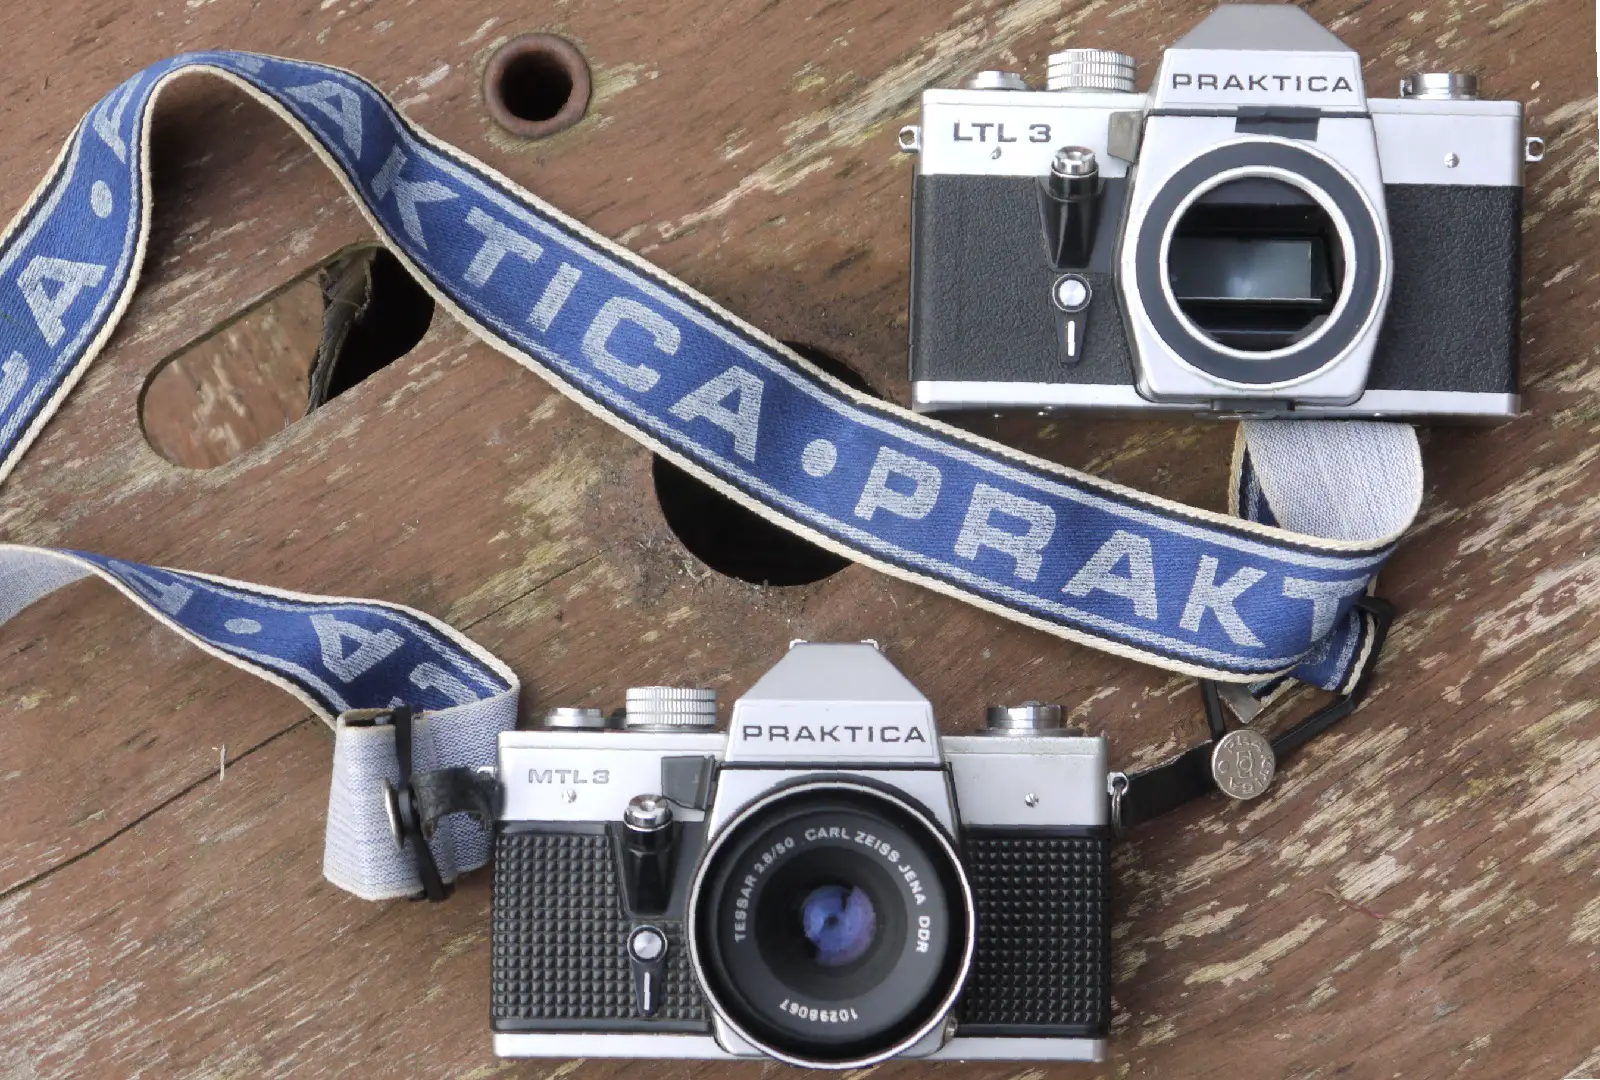 Praktica L Rievew - A Yearning for this old Line of SLRS - By Rock